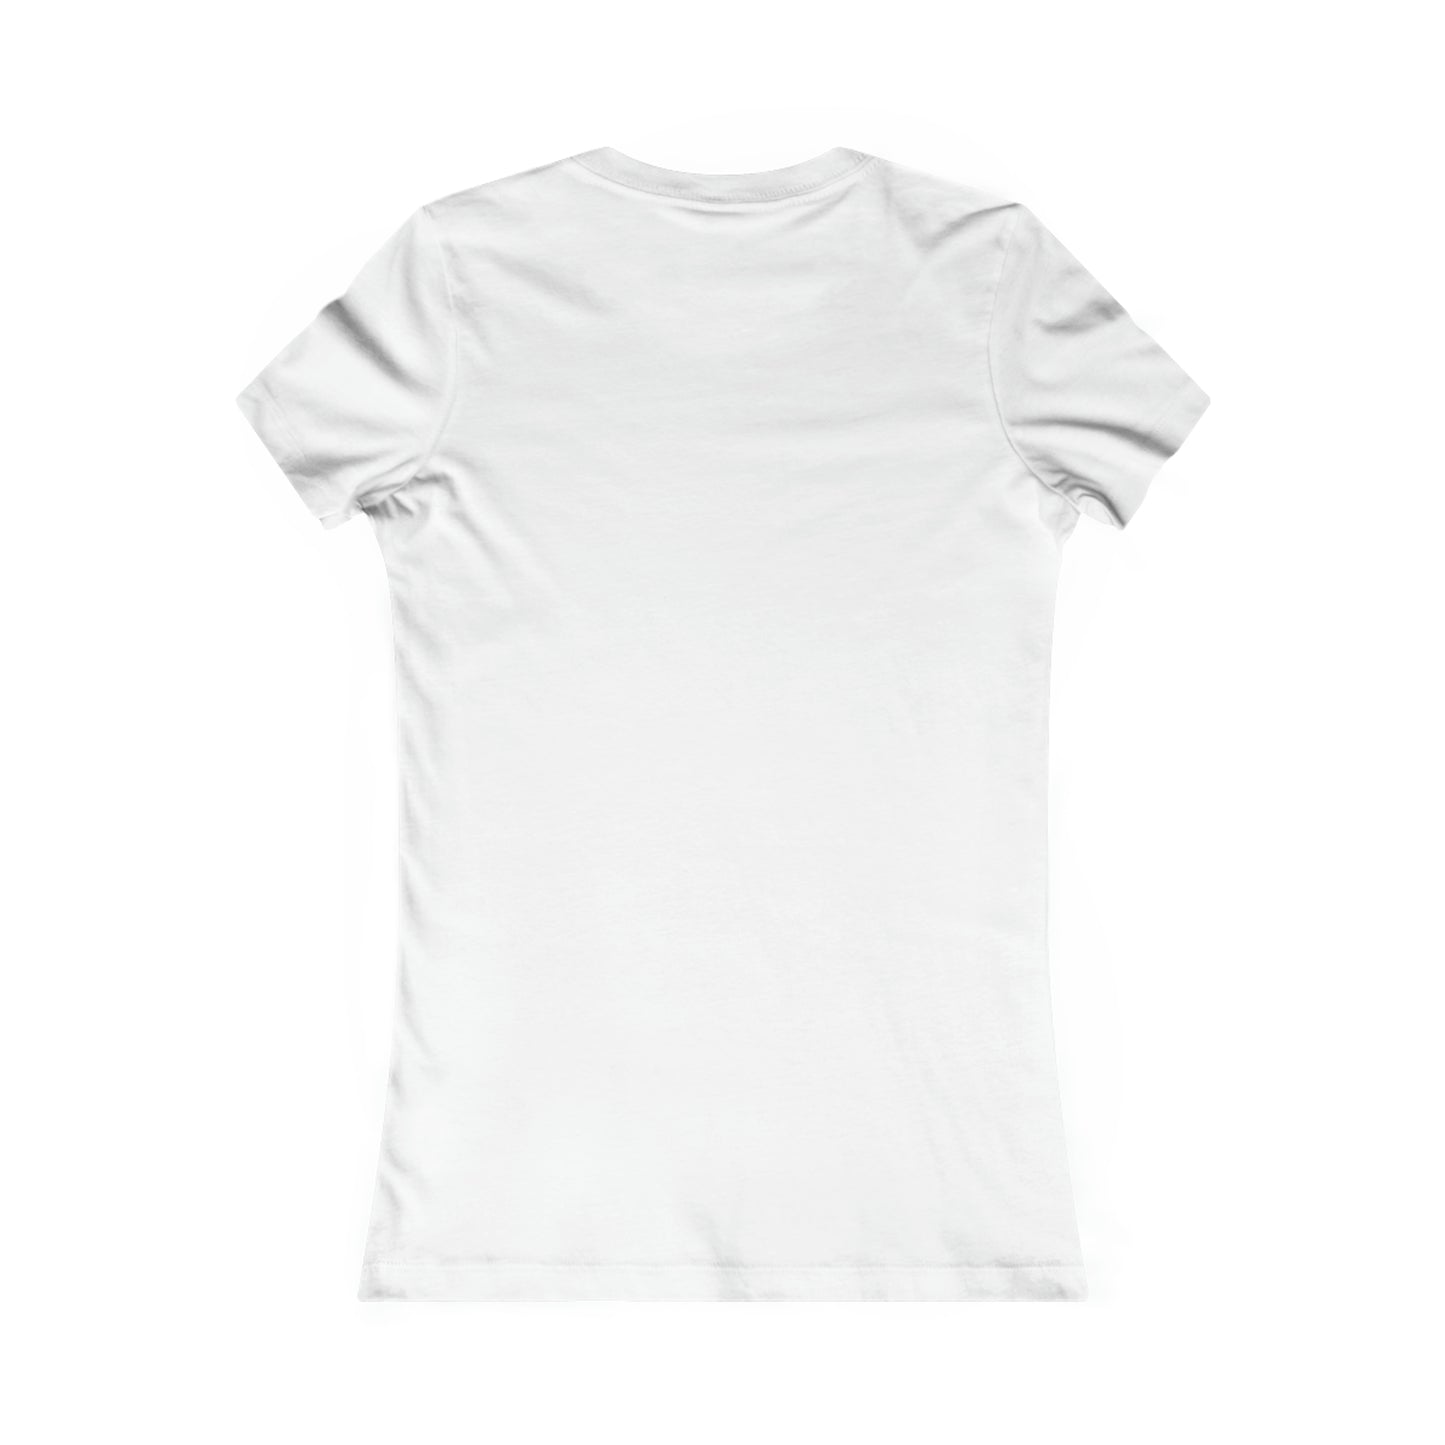 Women's Special Edition "Dancers" Slim Fit Color Tee